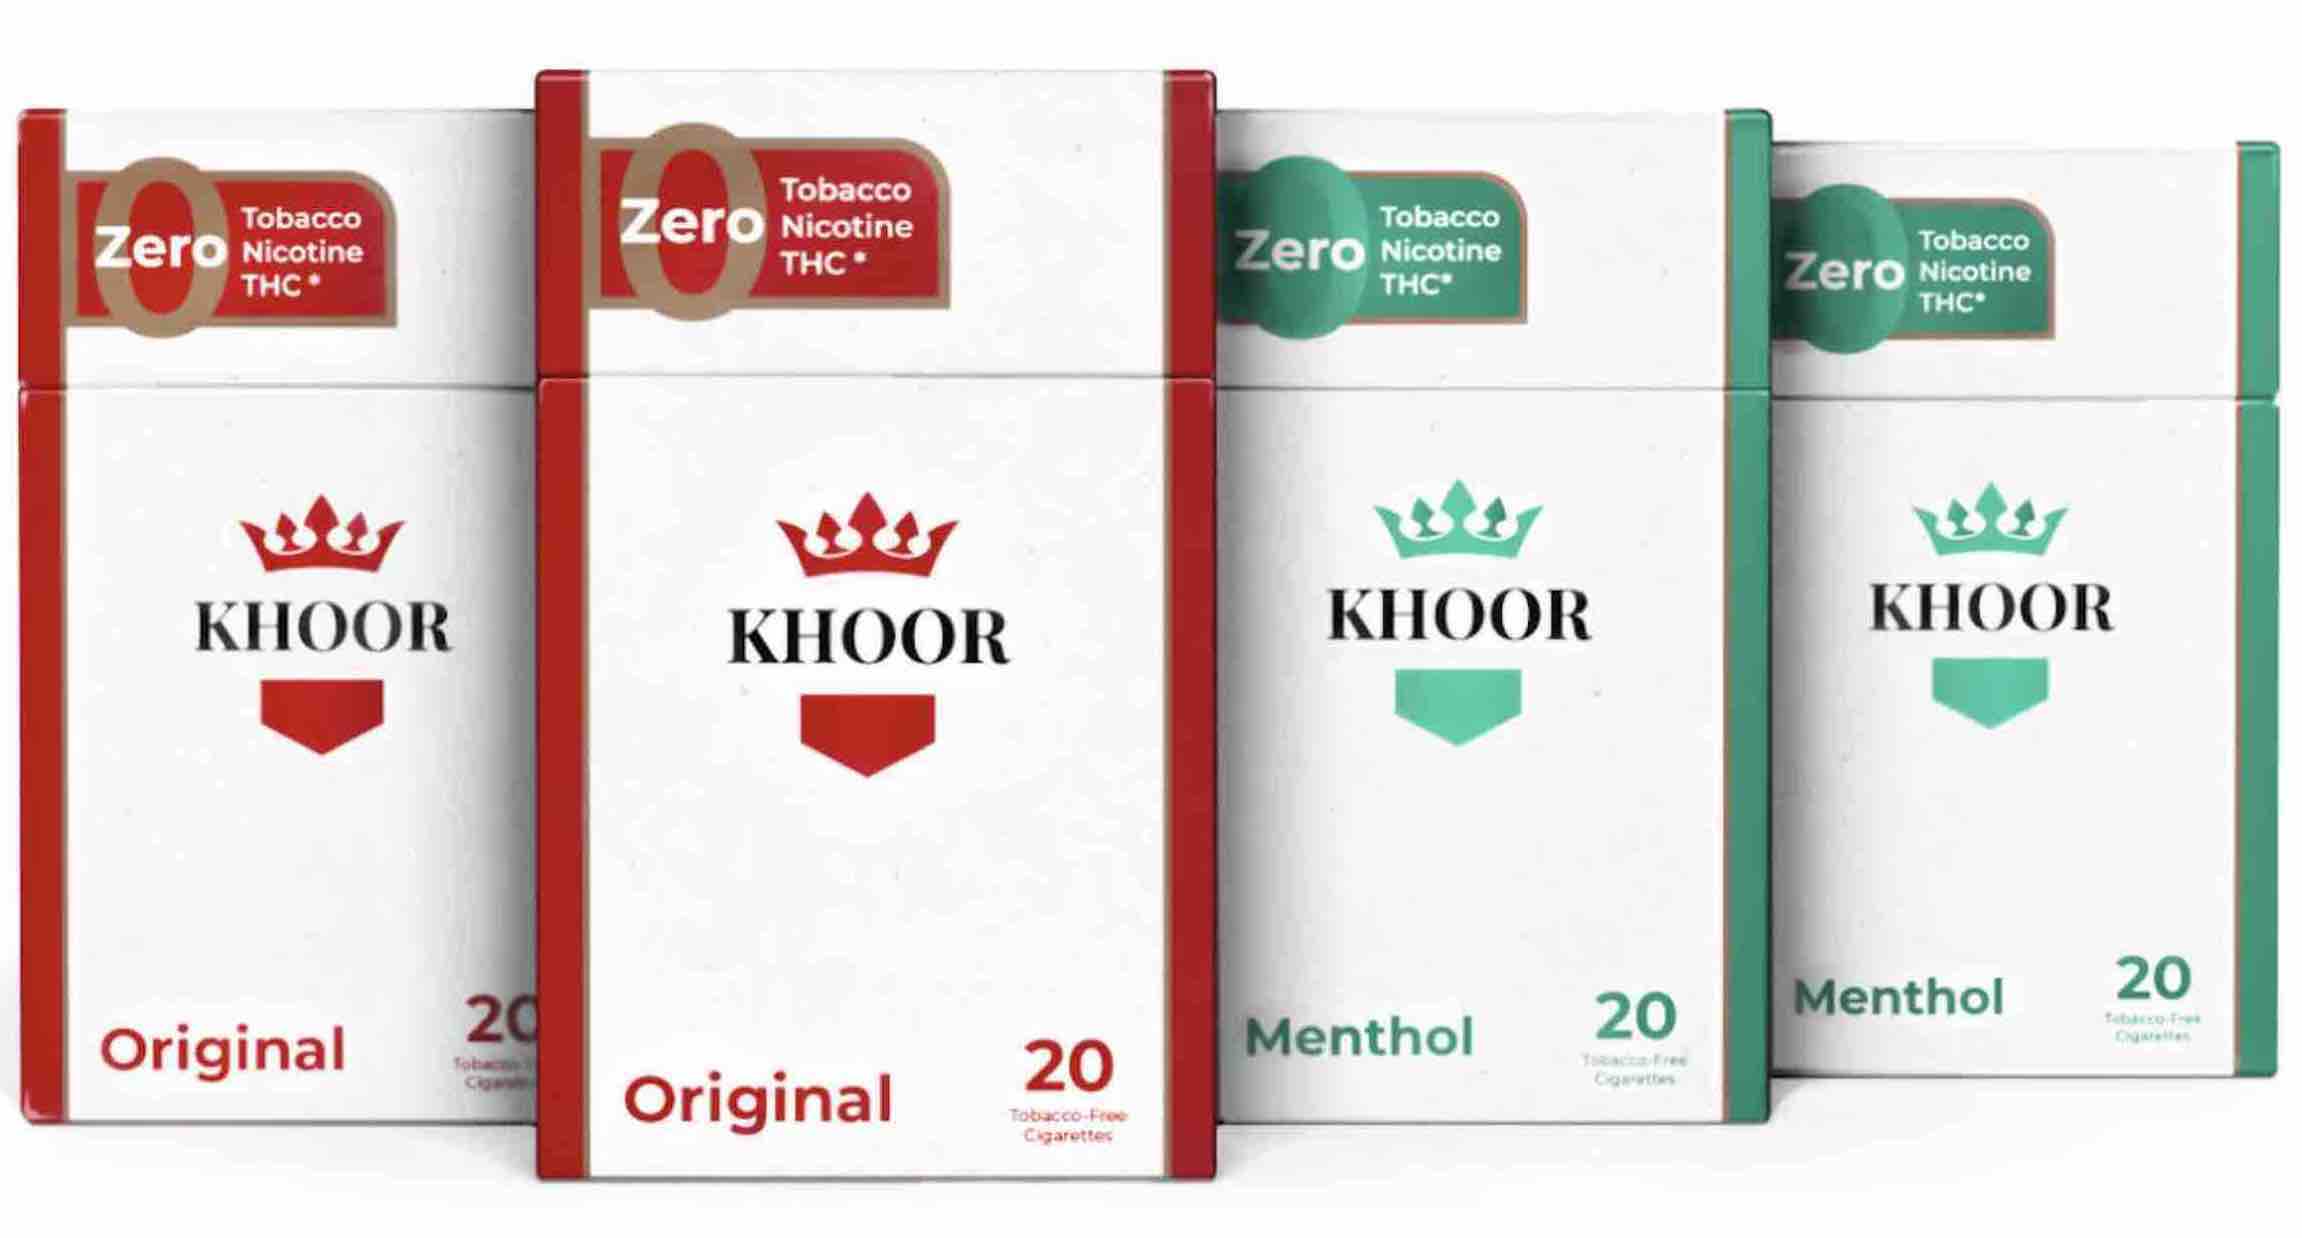 KHOOR Tobacco & Nicotine-Free Cigarettes featured image